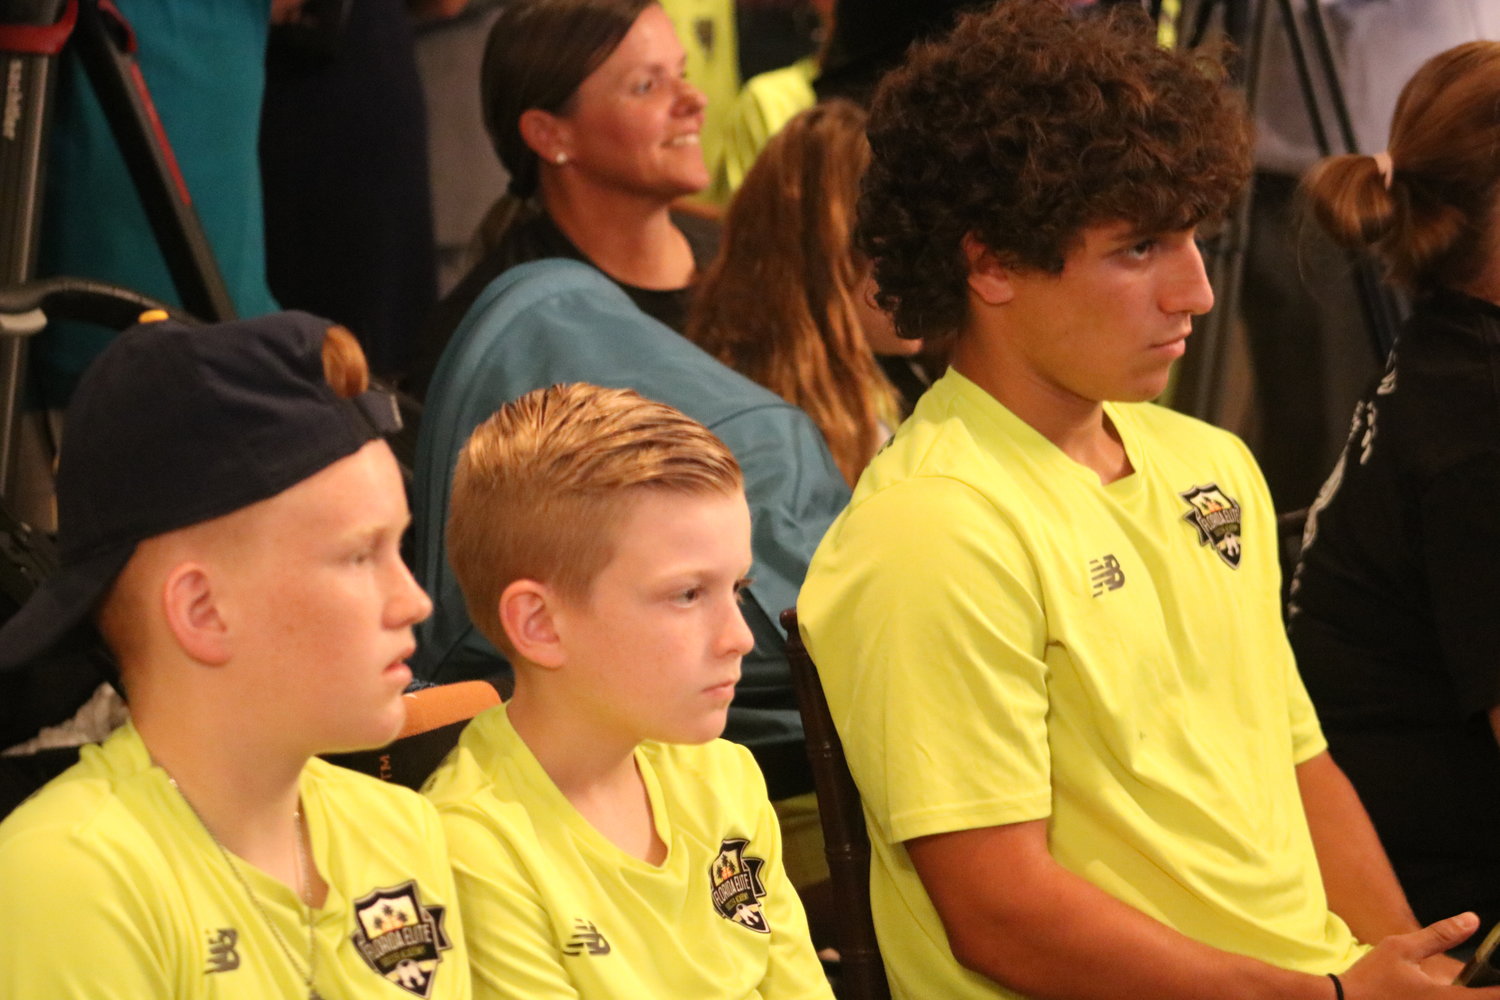 Members of the youth soccer organization Florida Elite were on hand during the announcement.